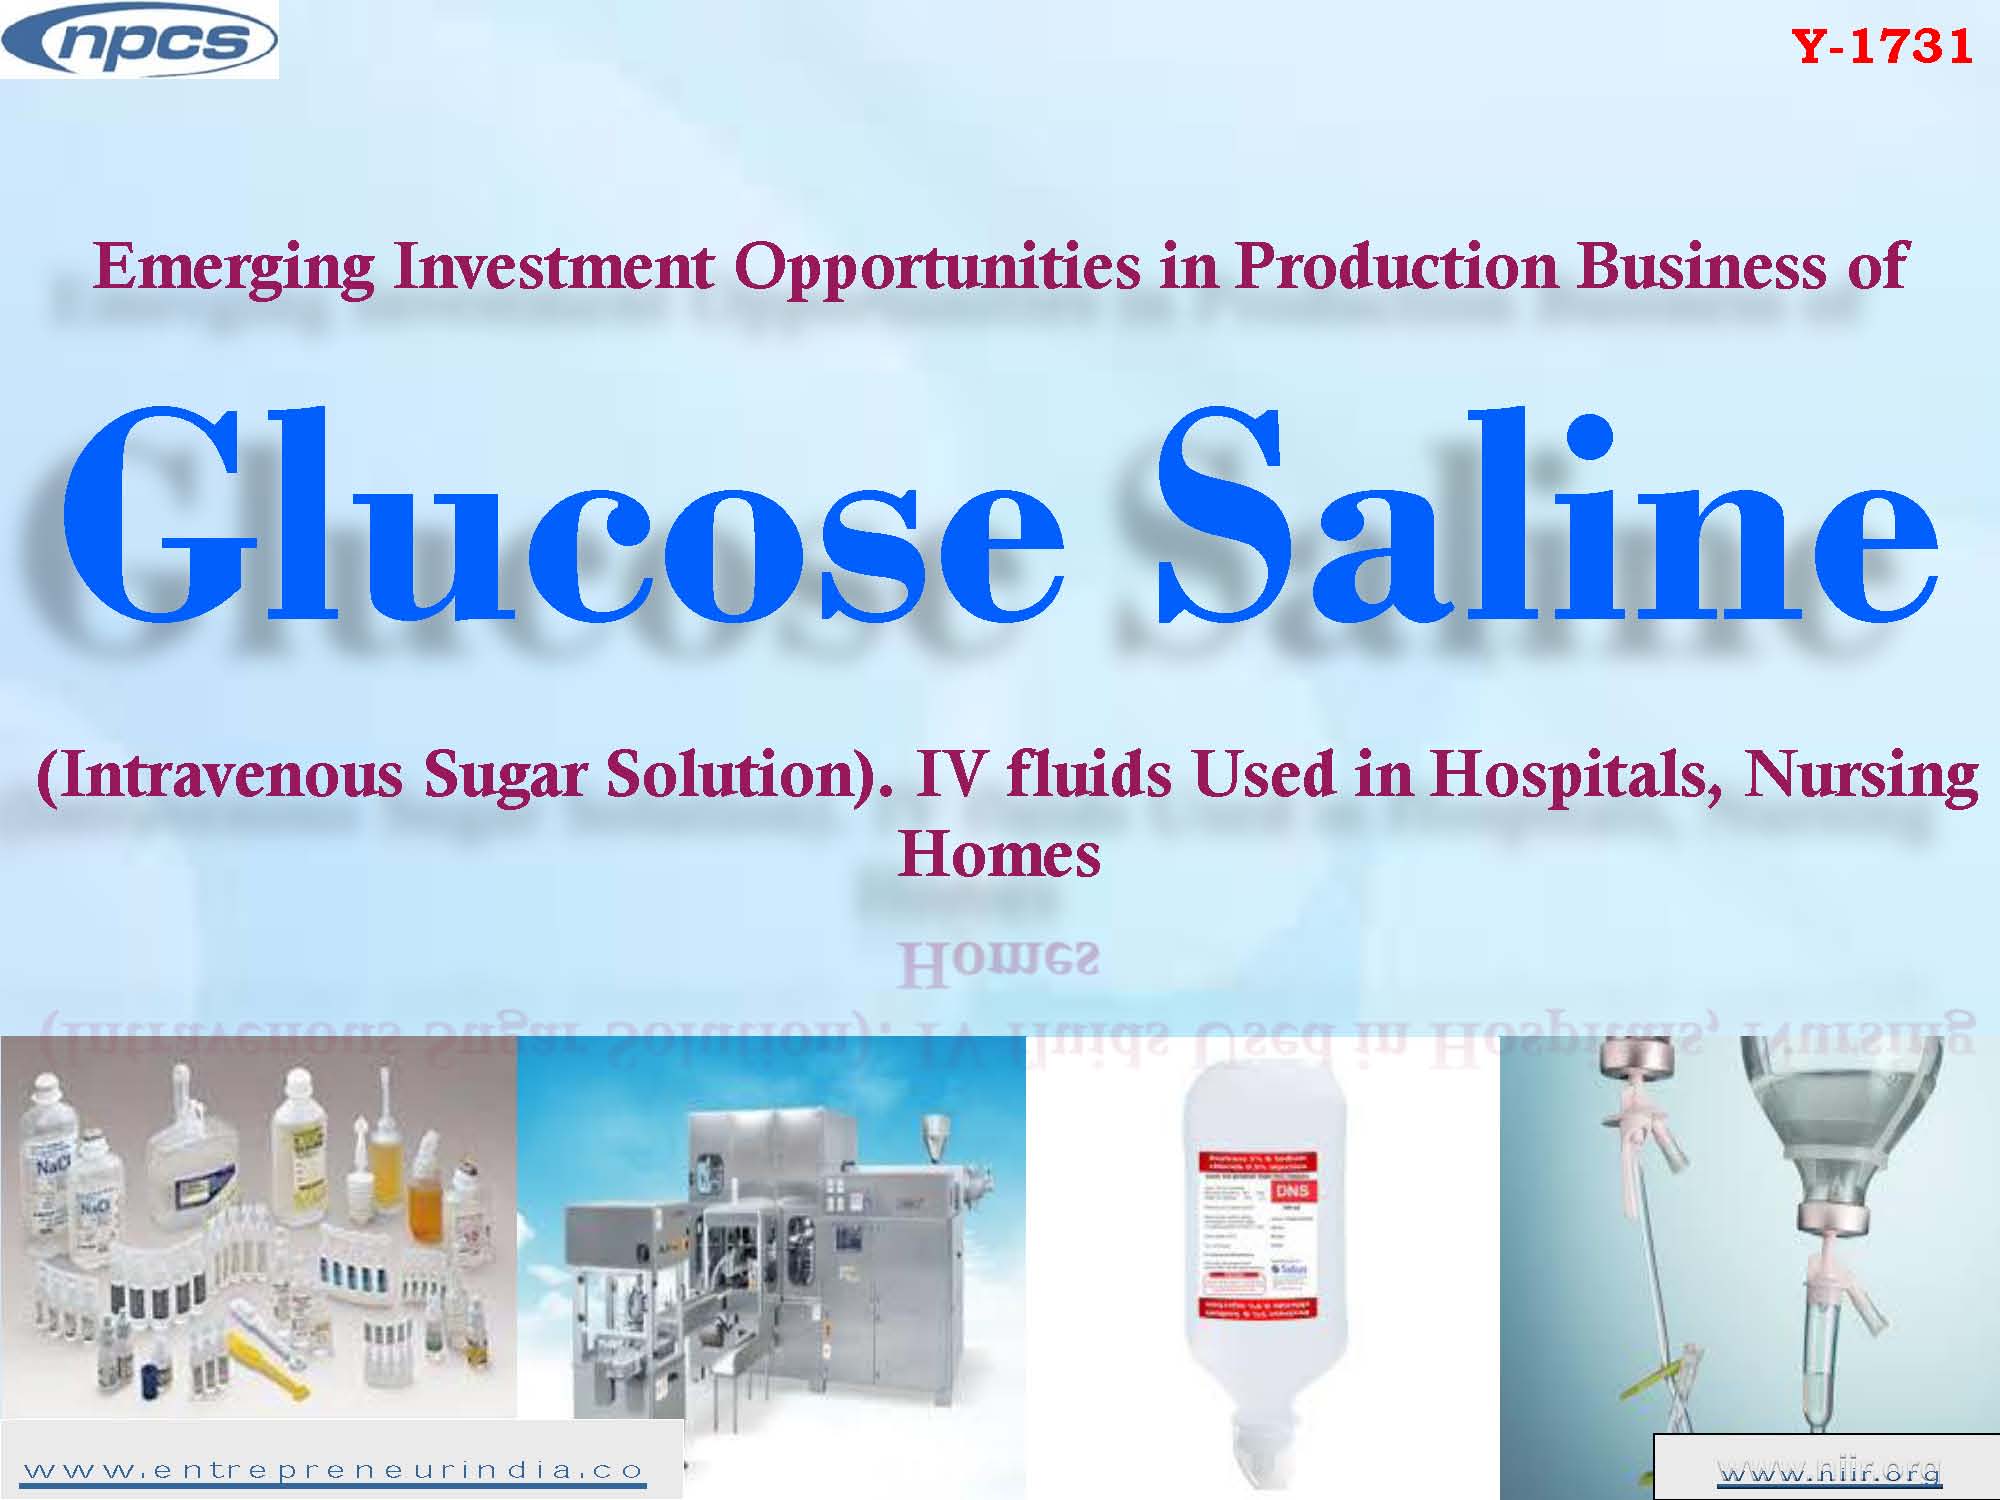 Emerging Investment Opportunities in Production Business of Glucose Saline (Intravenous Sugar Solution) IV fluids Used in Hospitals, Nursing Homes